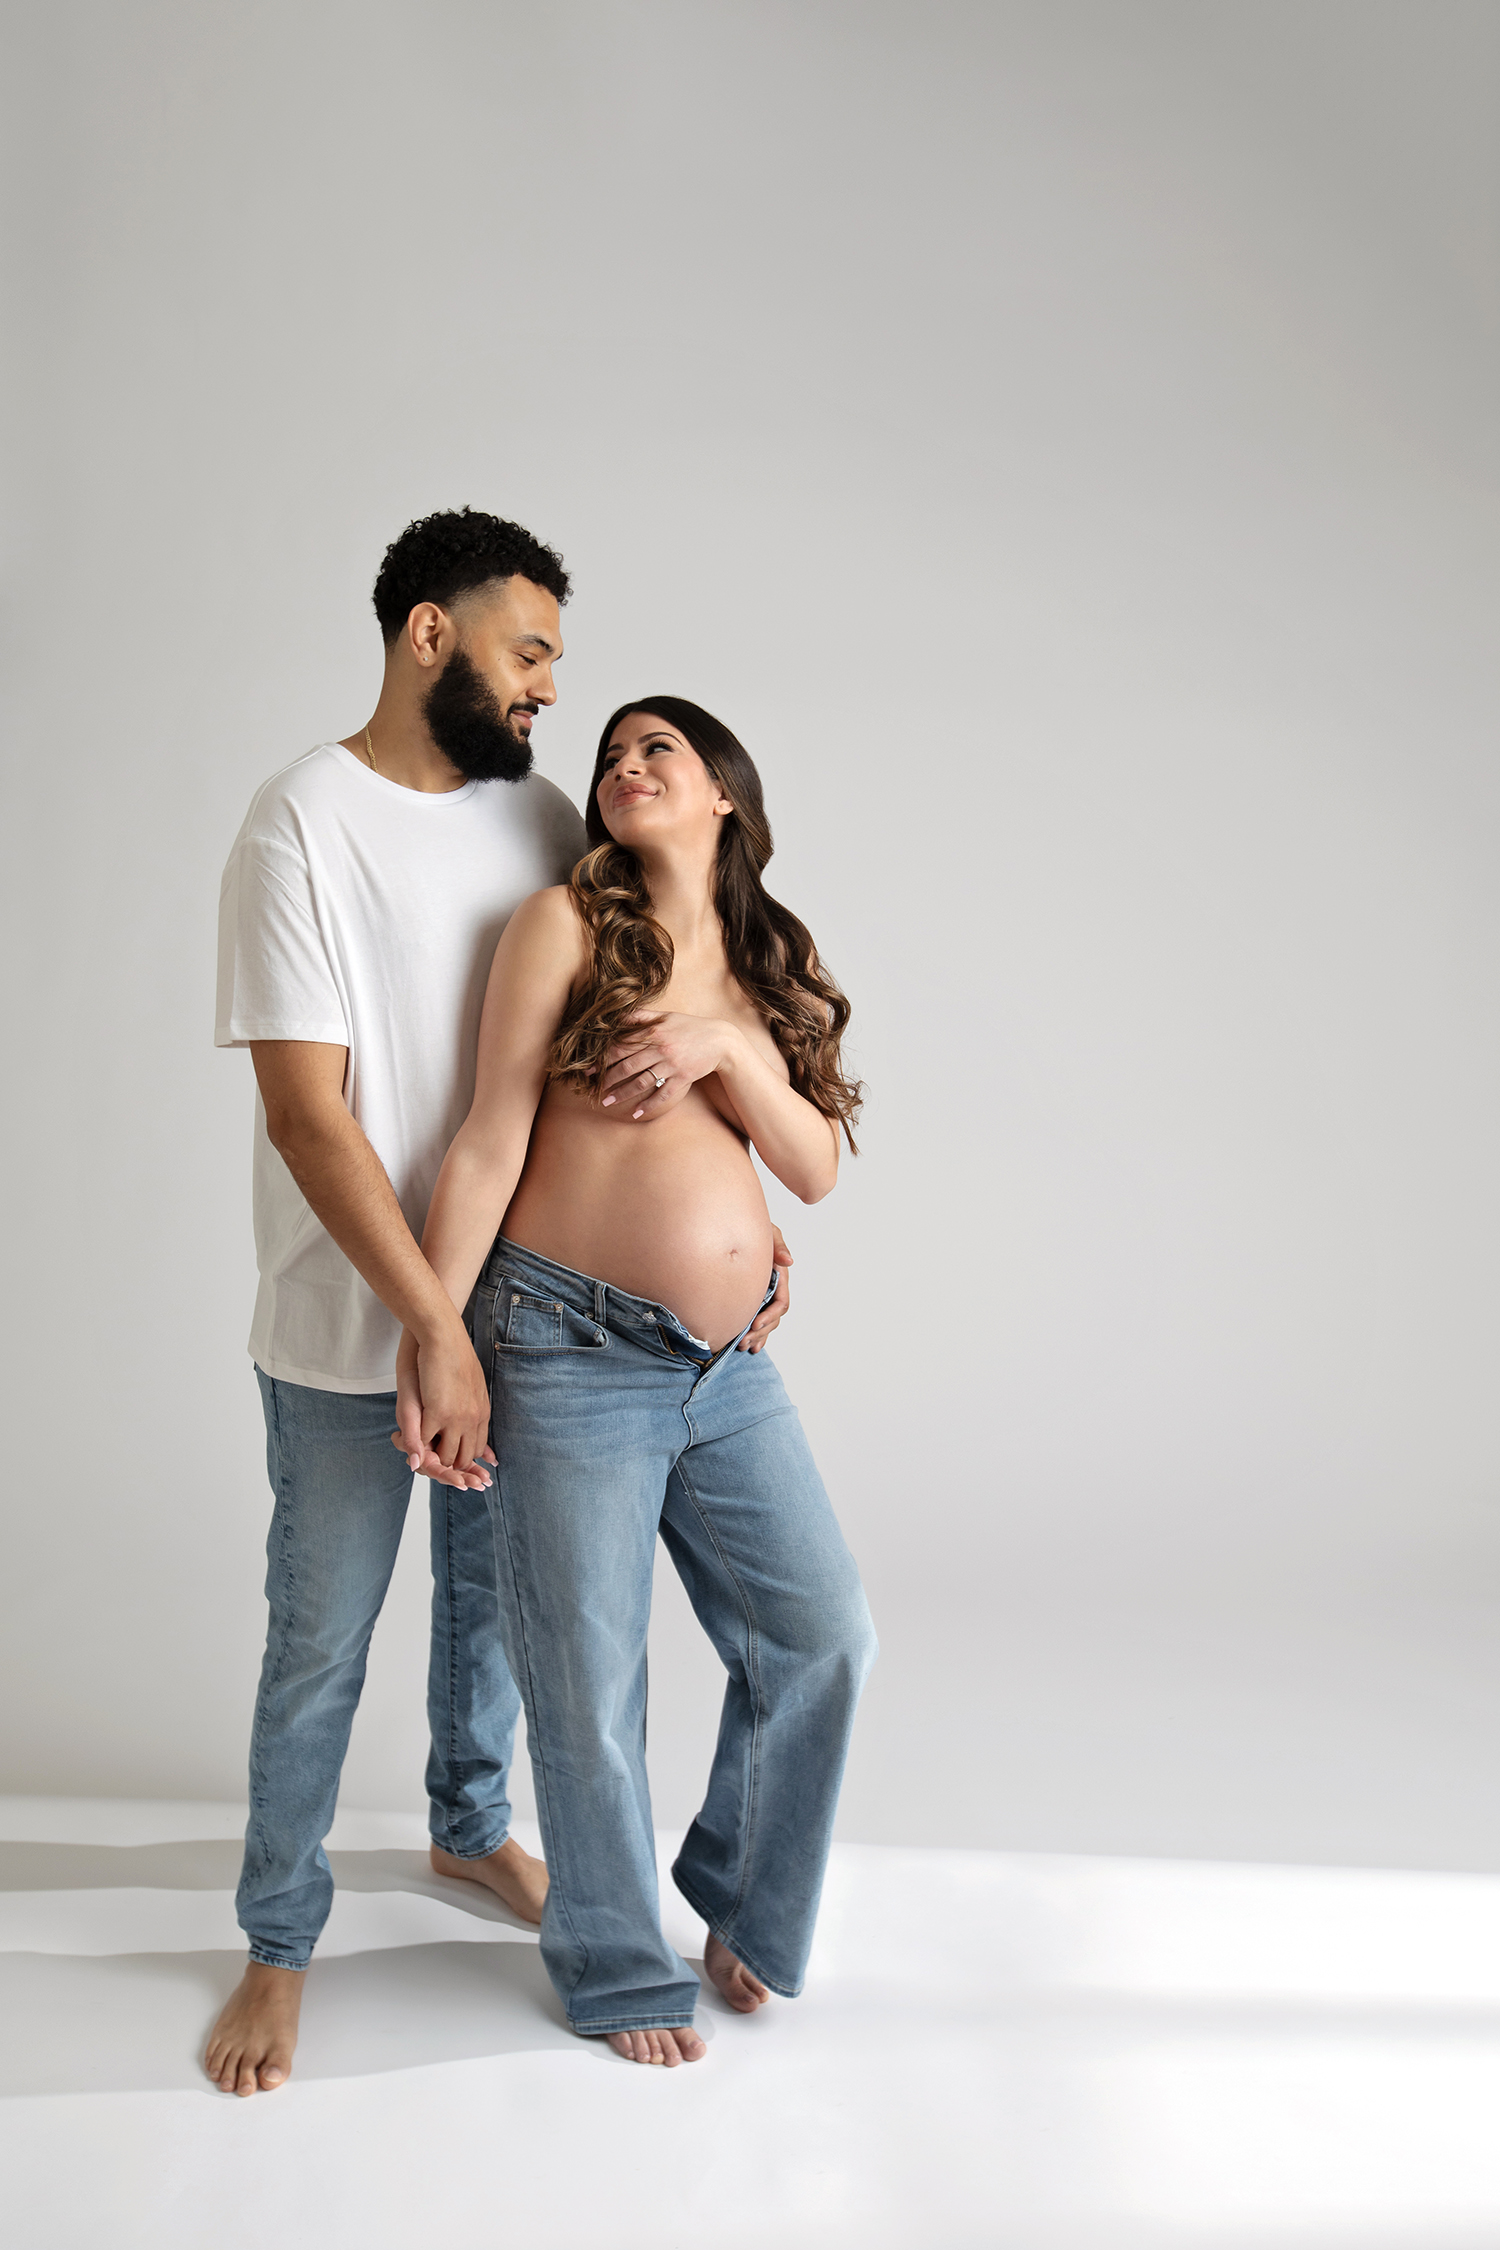 A couple embraces during a maternity photoshoot